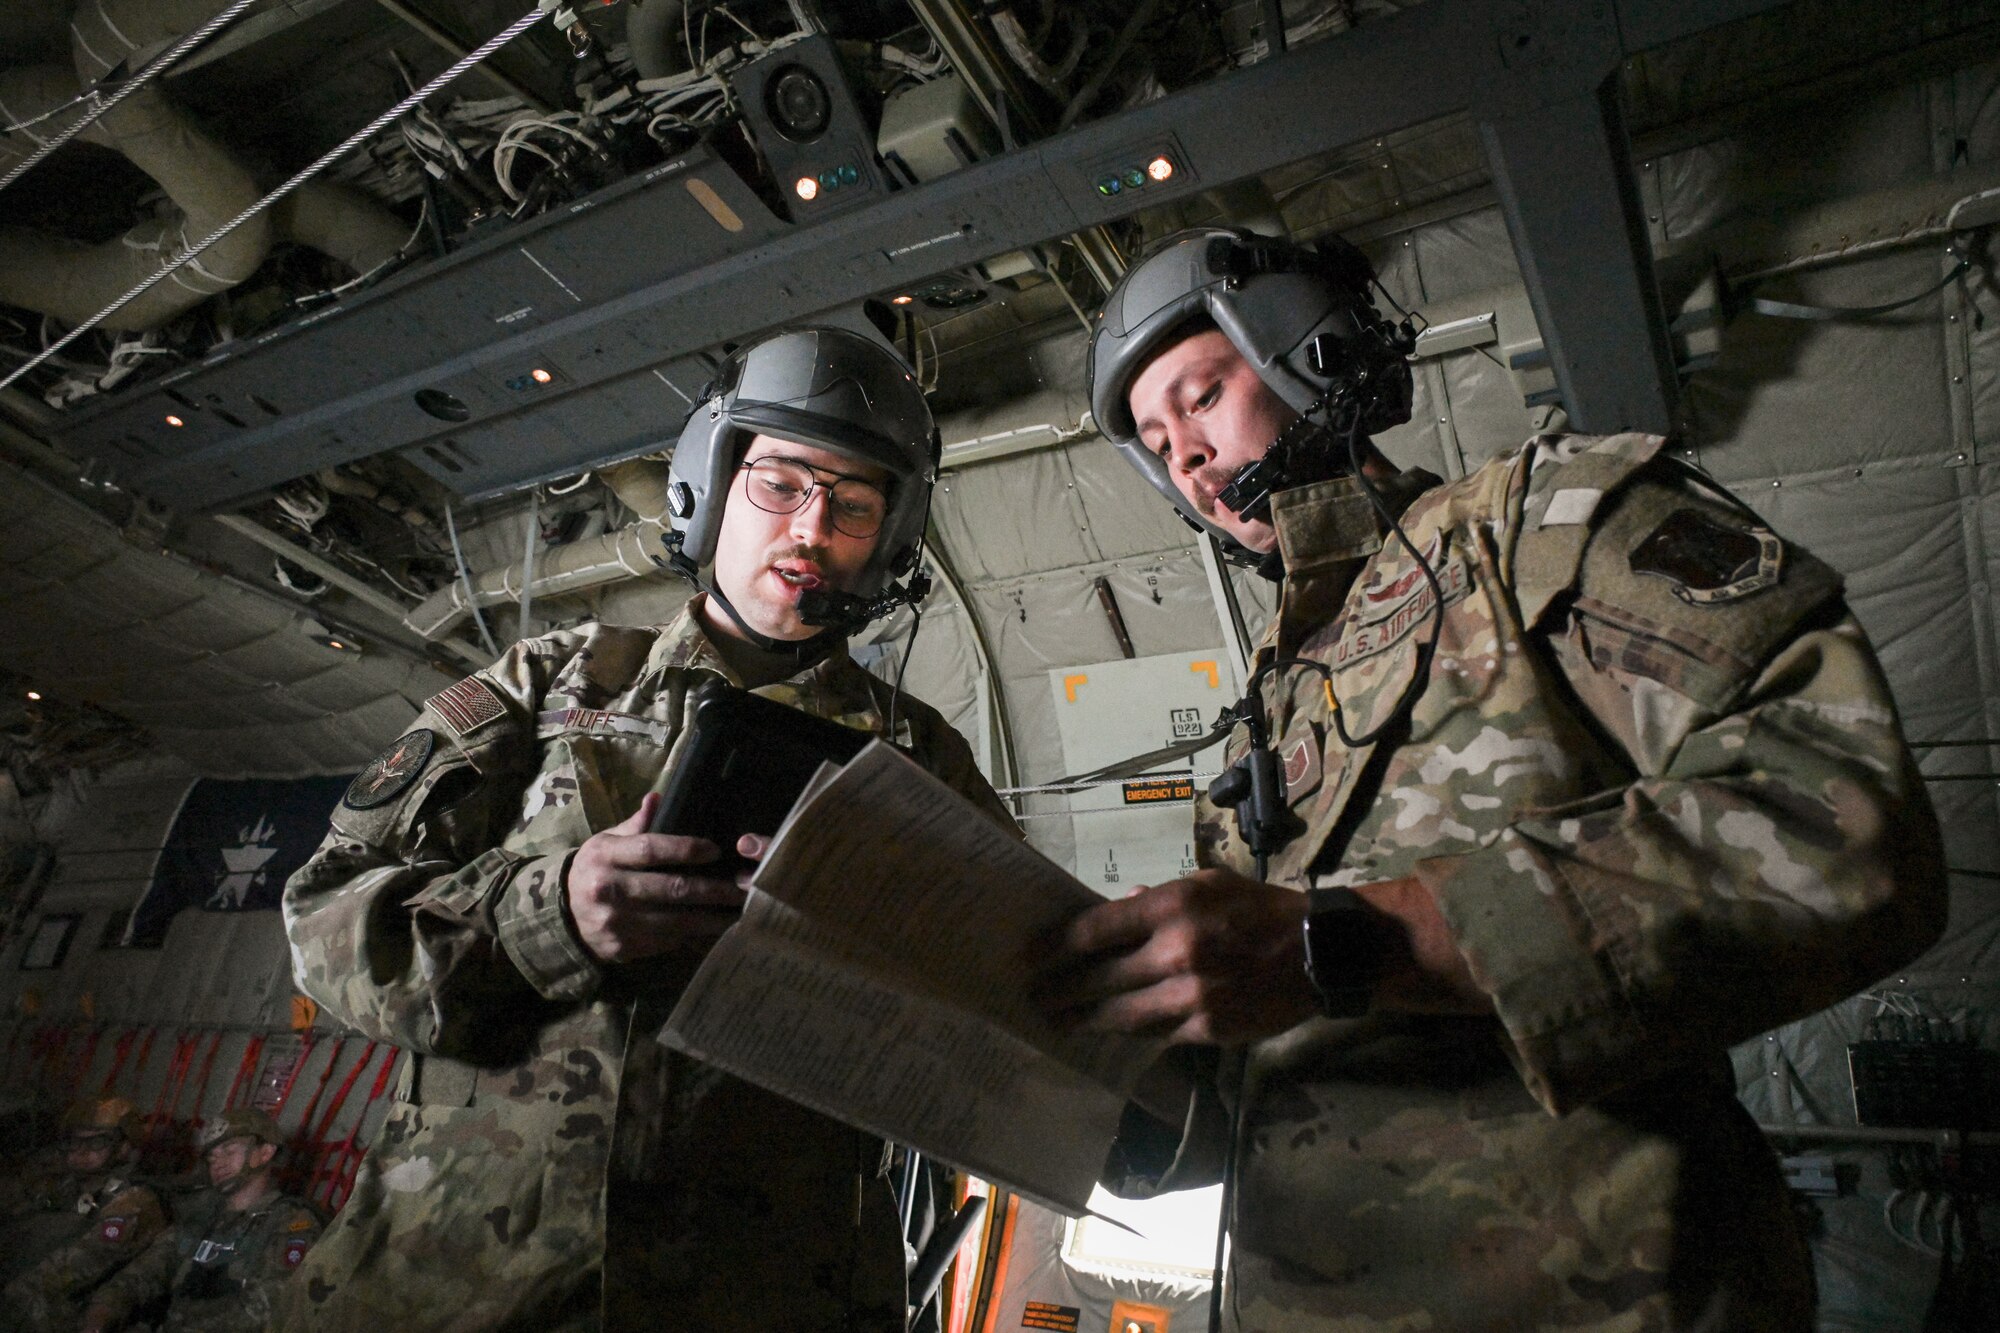 Airmen prepare the aircraft before take-off.